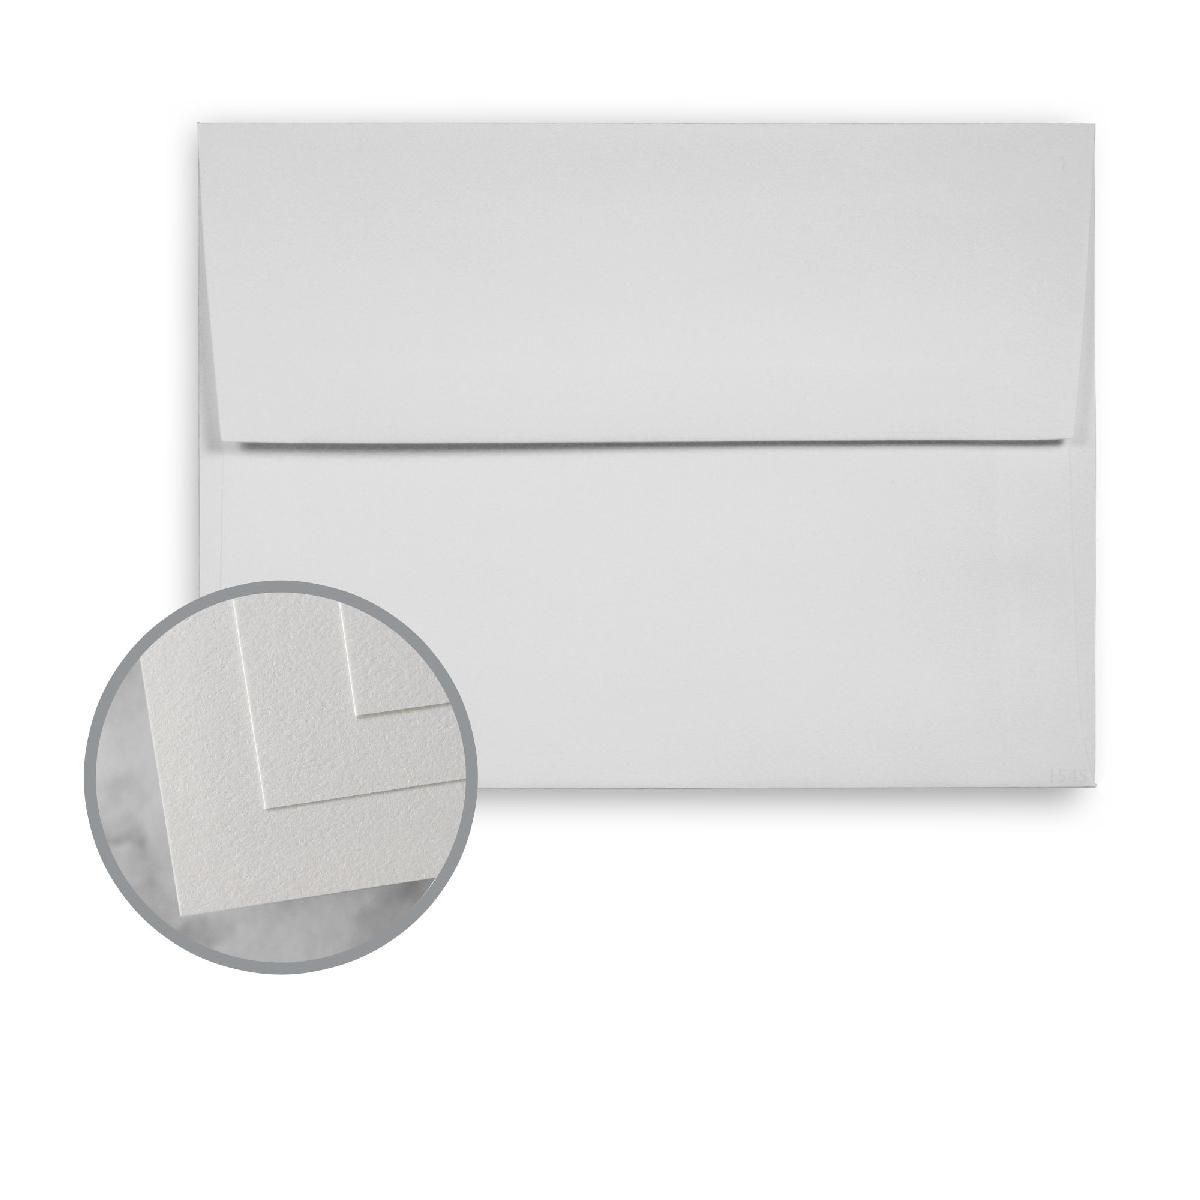 Neenah Paper® Classic Crest Antique Gray Smooth 80 lb. 4.75 x 6.5 in. A-6 Envelopes 250 per Box